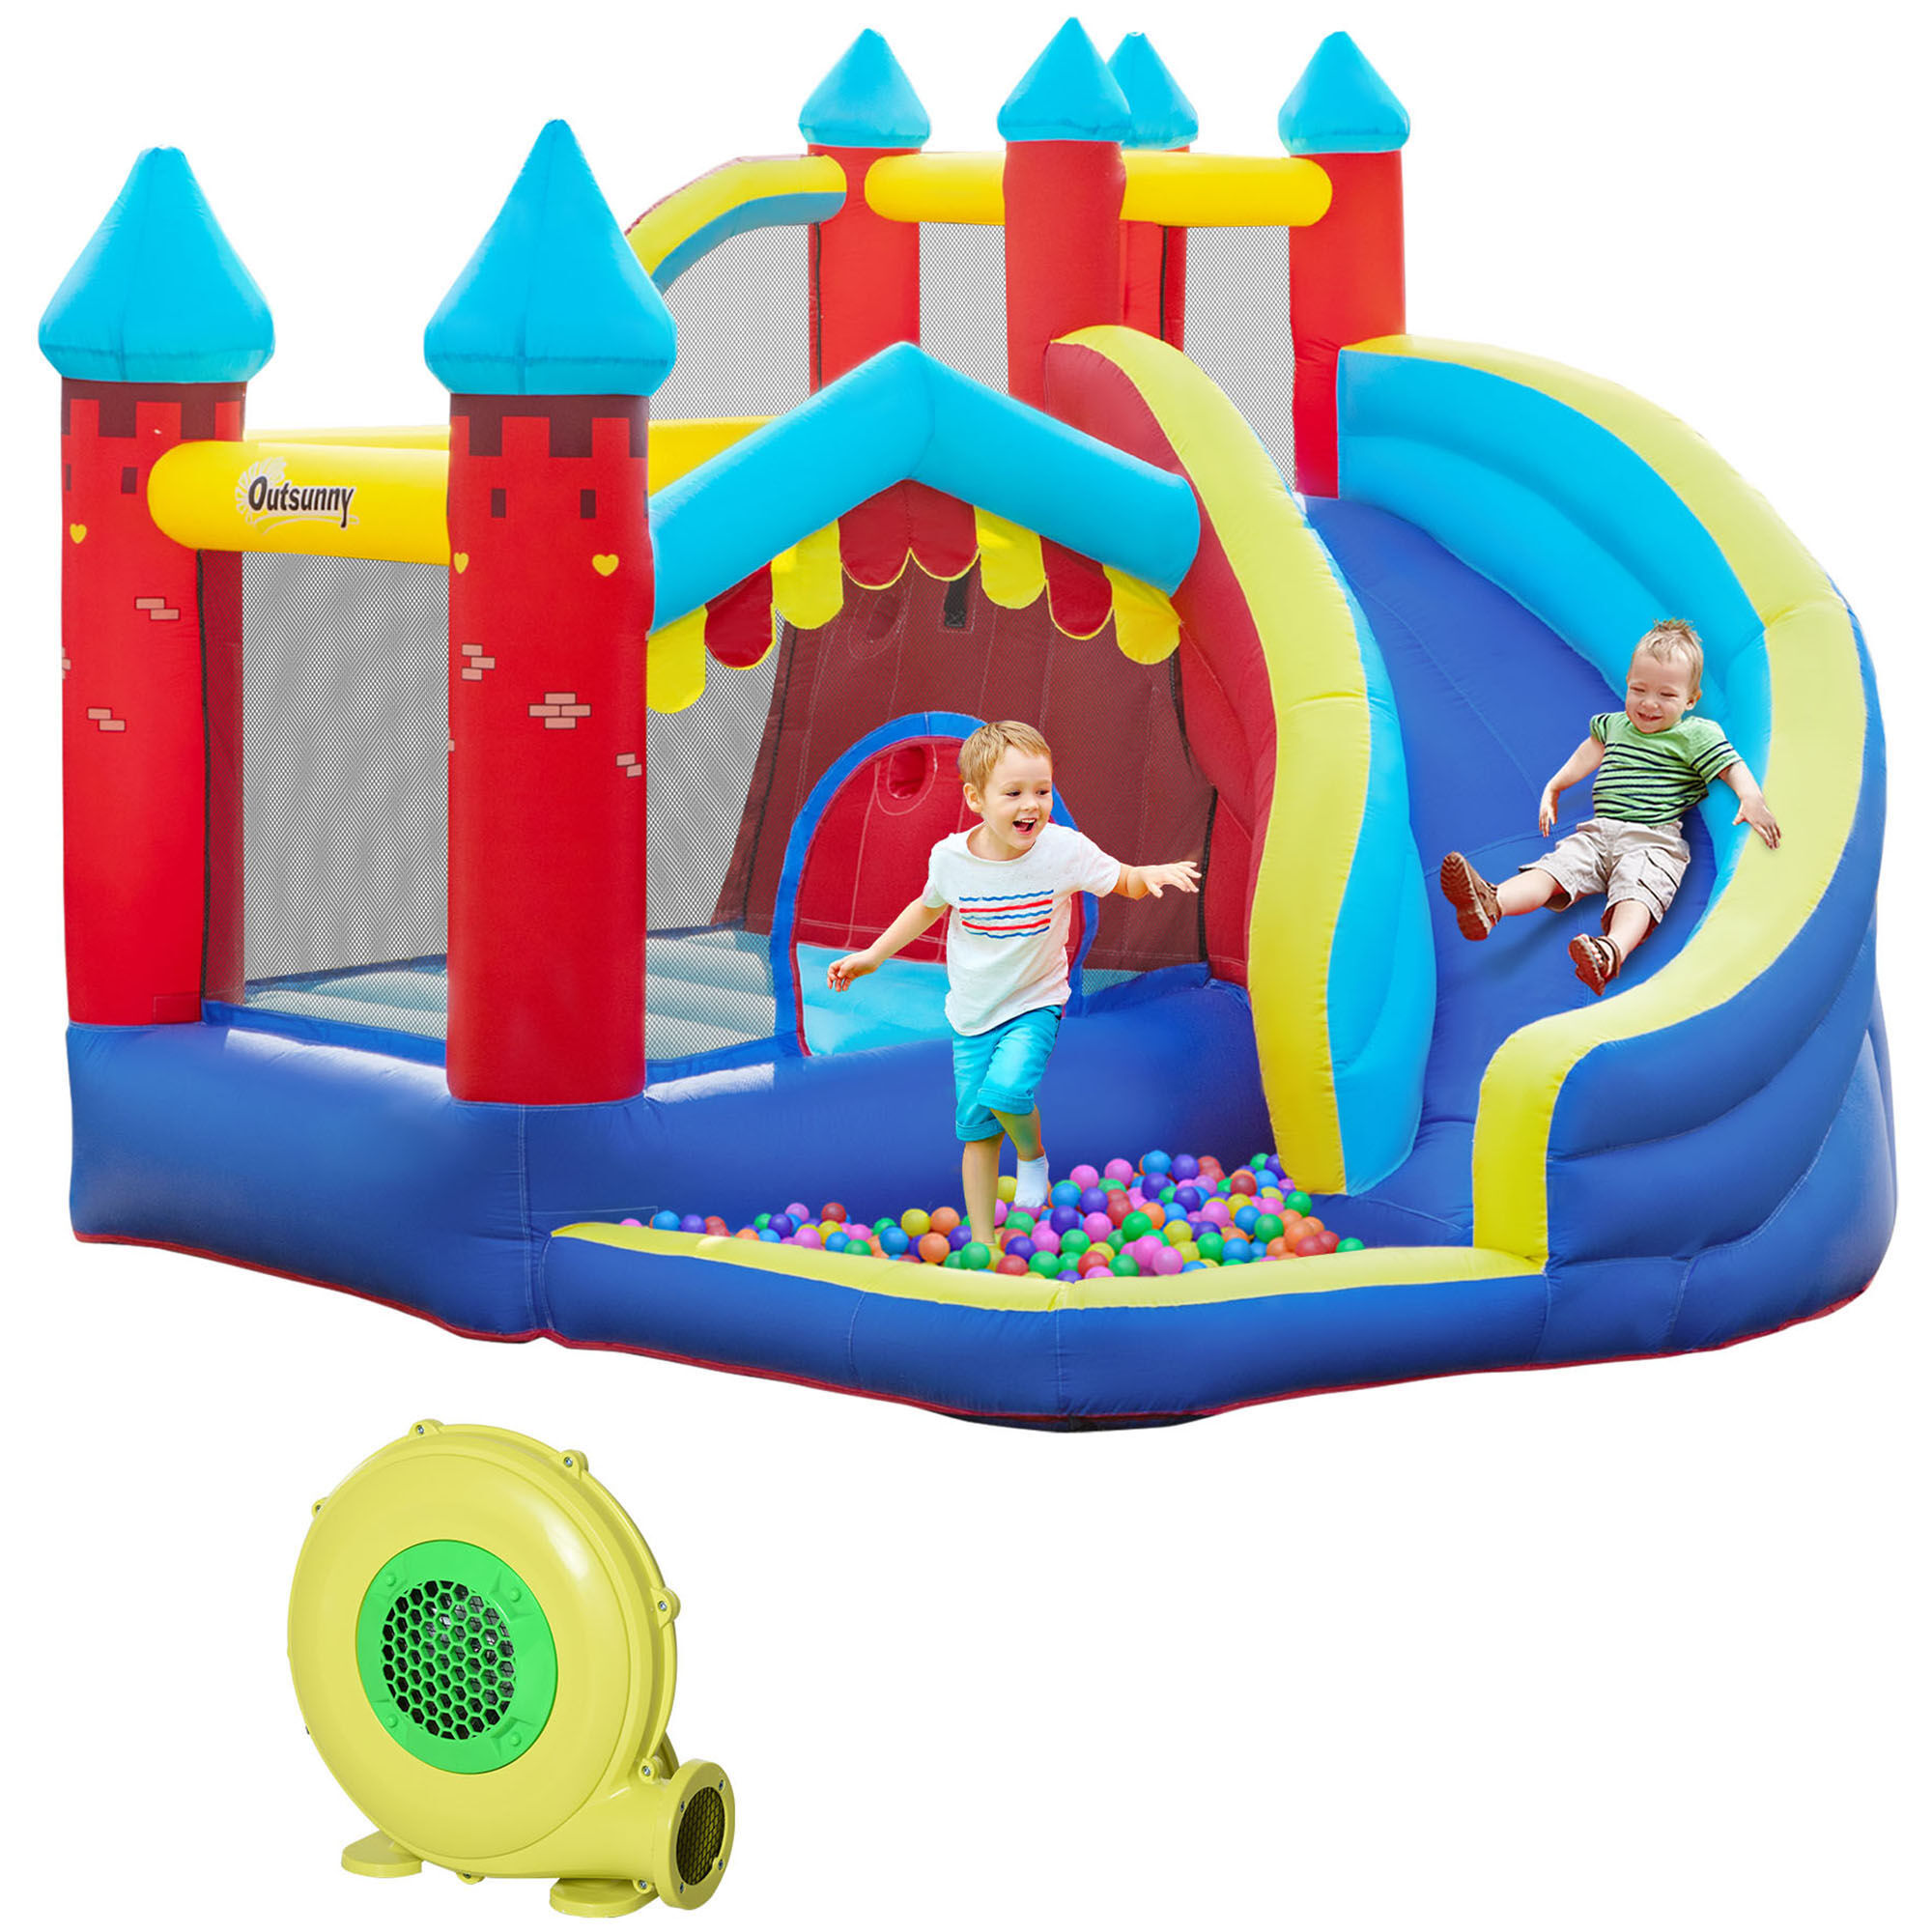 Outsunny Children's Inflatable Play Castle, 4-in-1 Bouncy House with Slide, Water Pool, Climbing Wall, for Ages 3-8, 2.9 x 2.7 x 2.3m